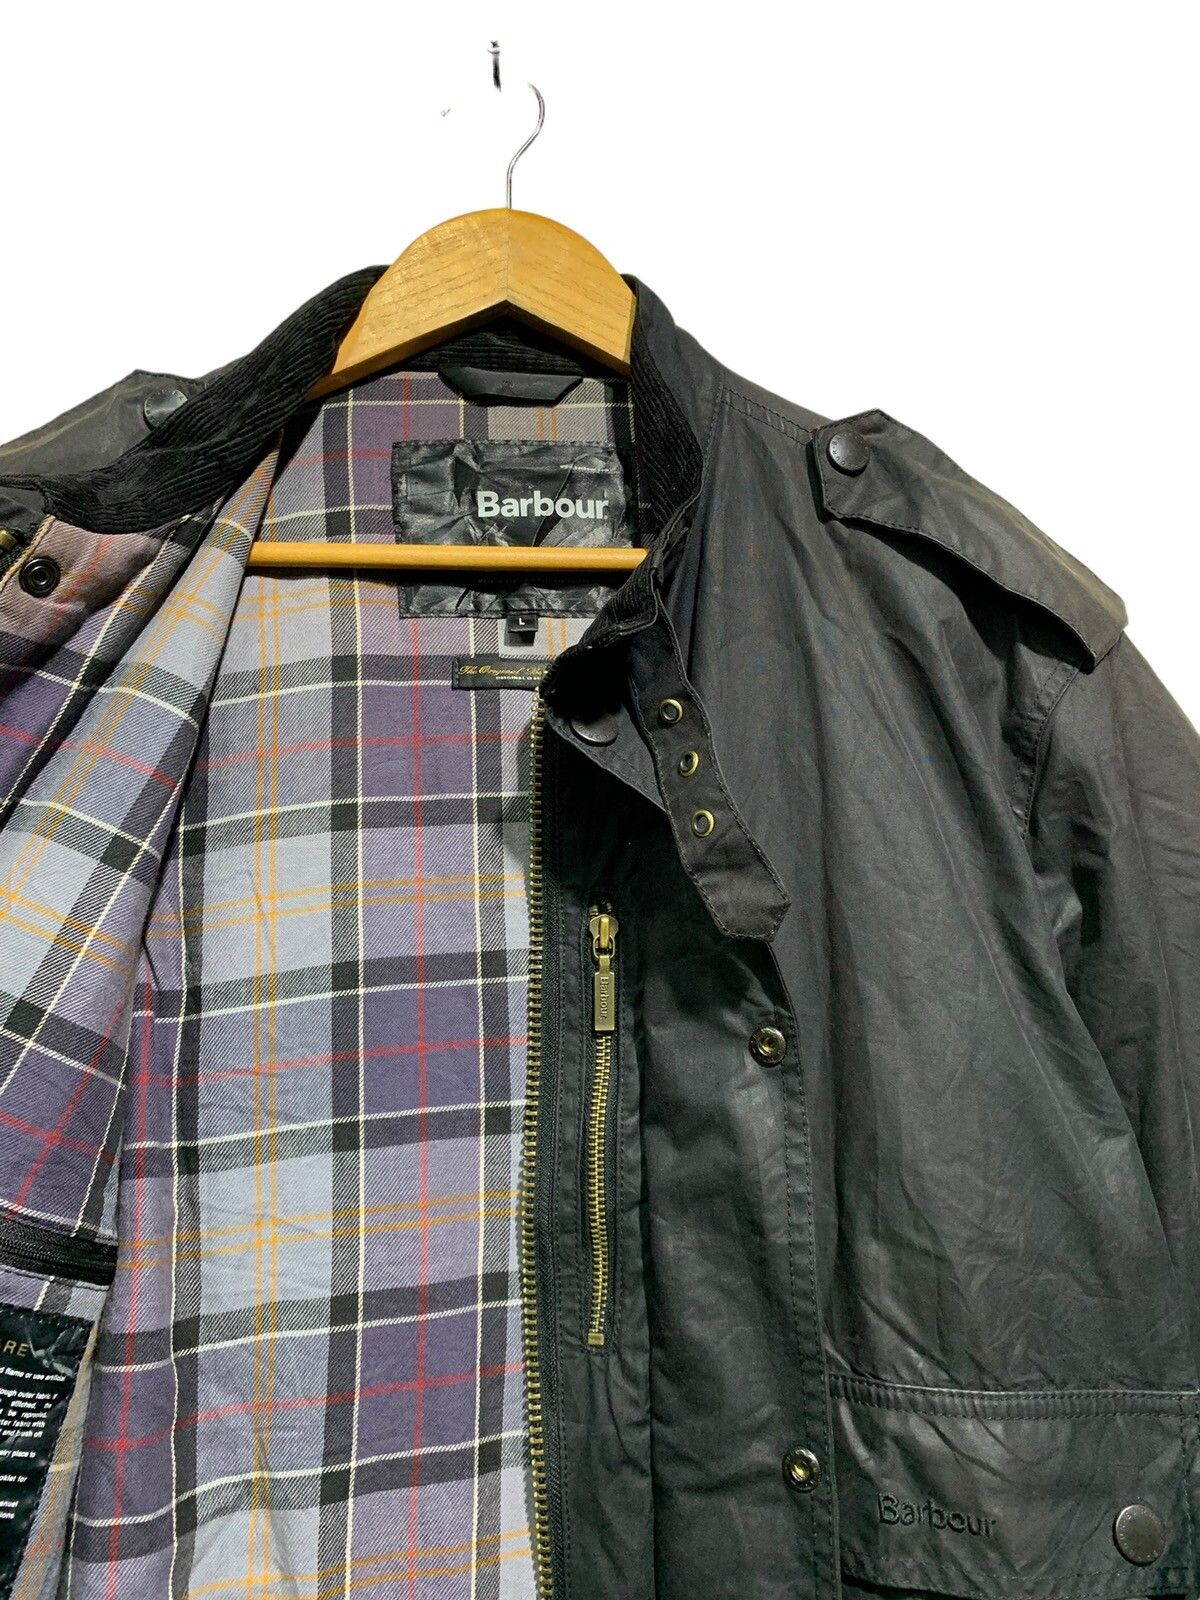 🔥BARBOUR INTERNATIONAL WAXED BOMBER JACKETS - 11